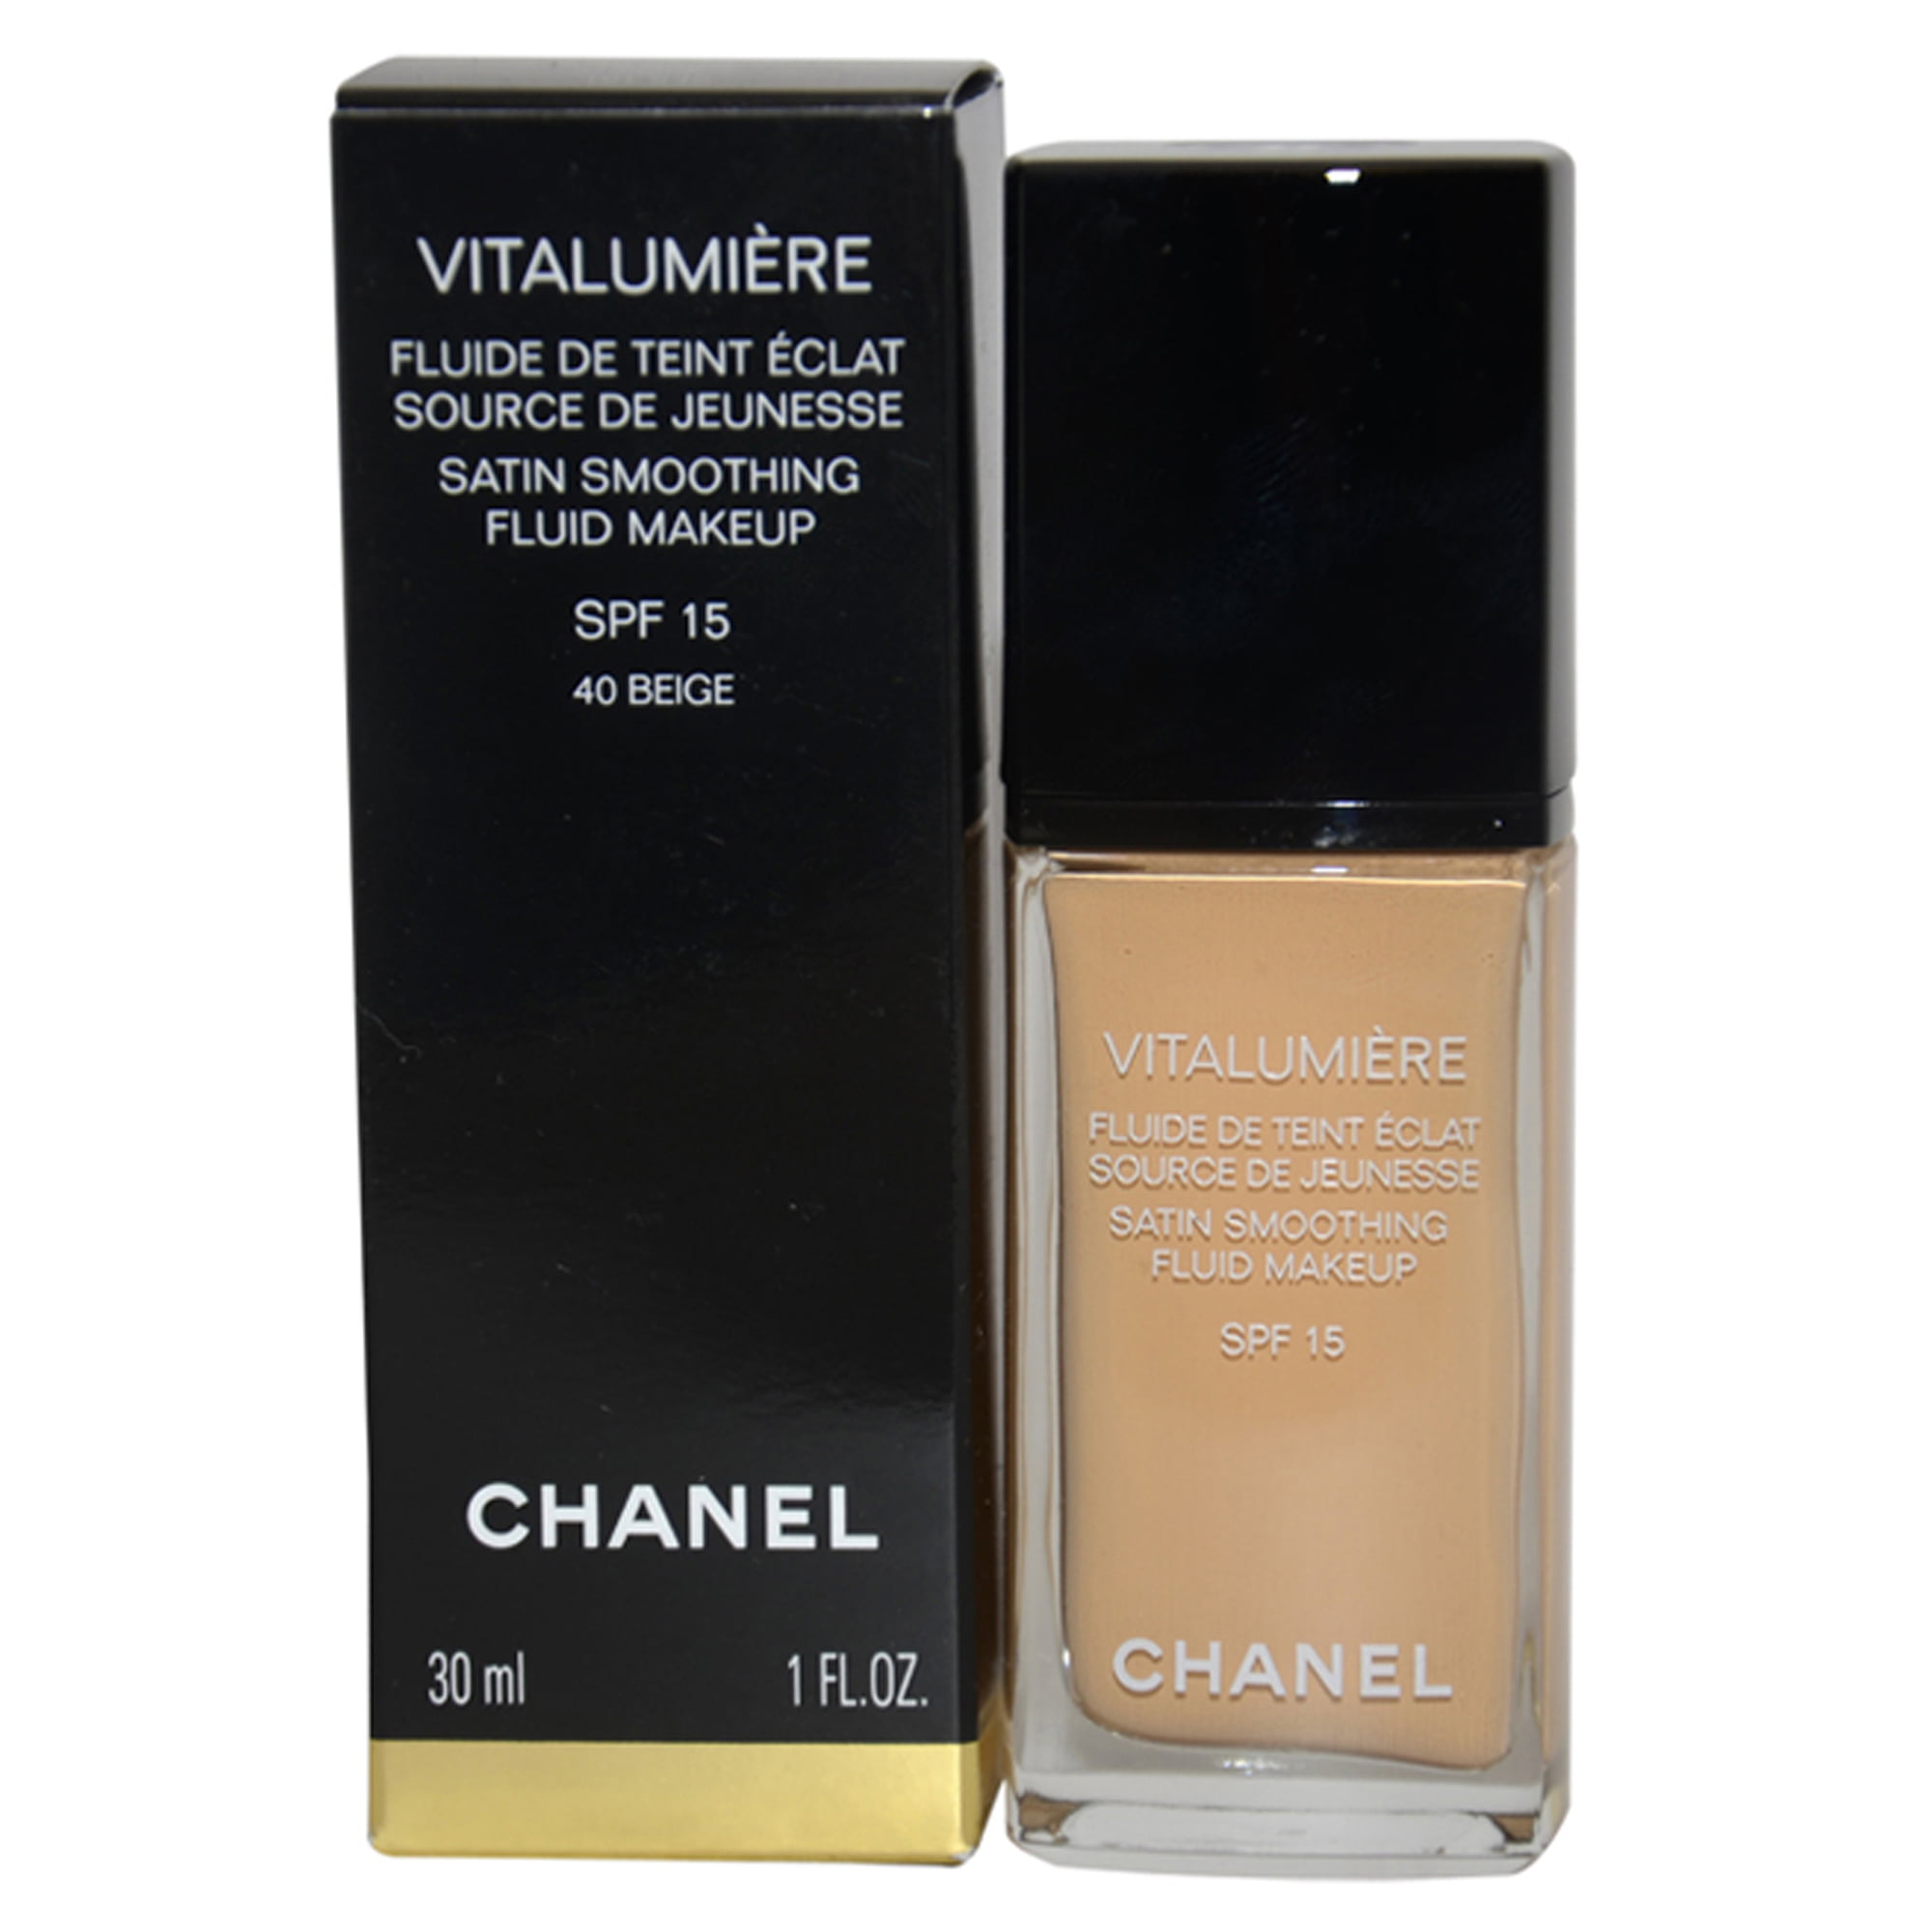 CHANEL LIFT LUMIÈRE Firming and Smoothing Fluid Makeup SPF 15